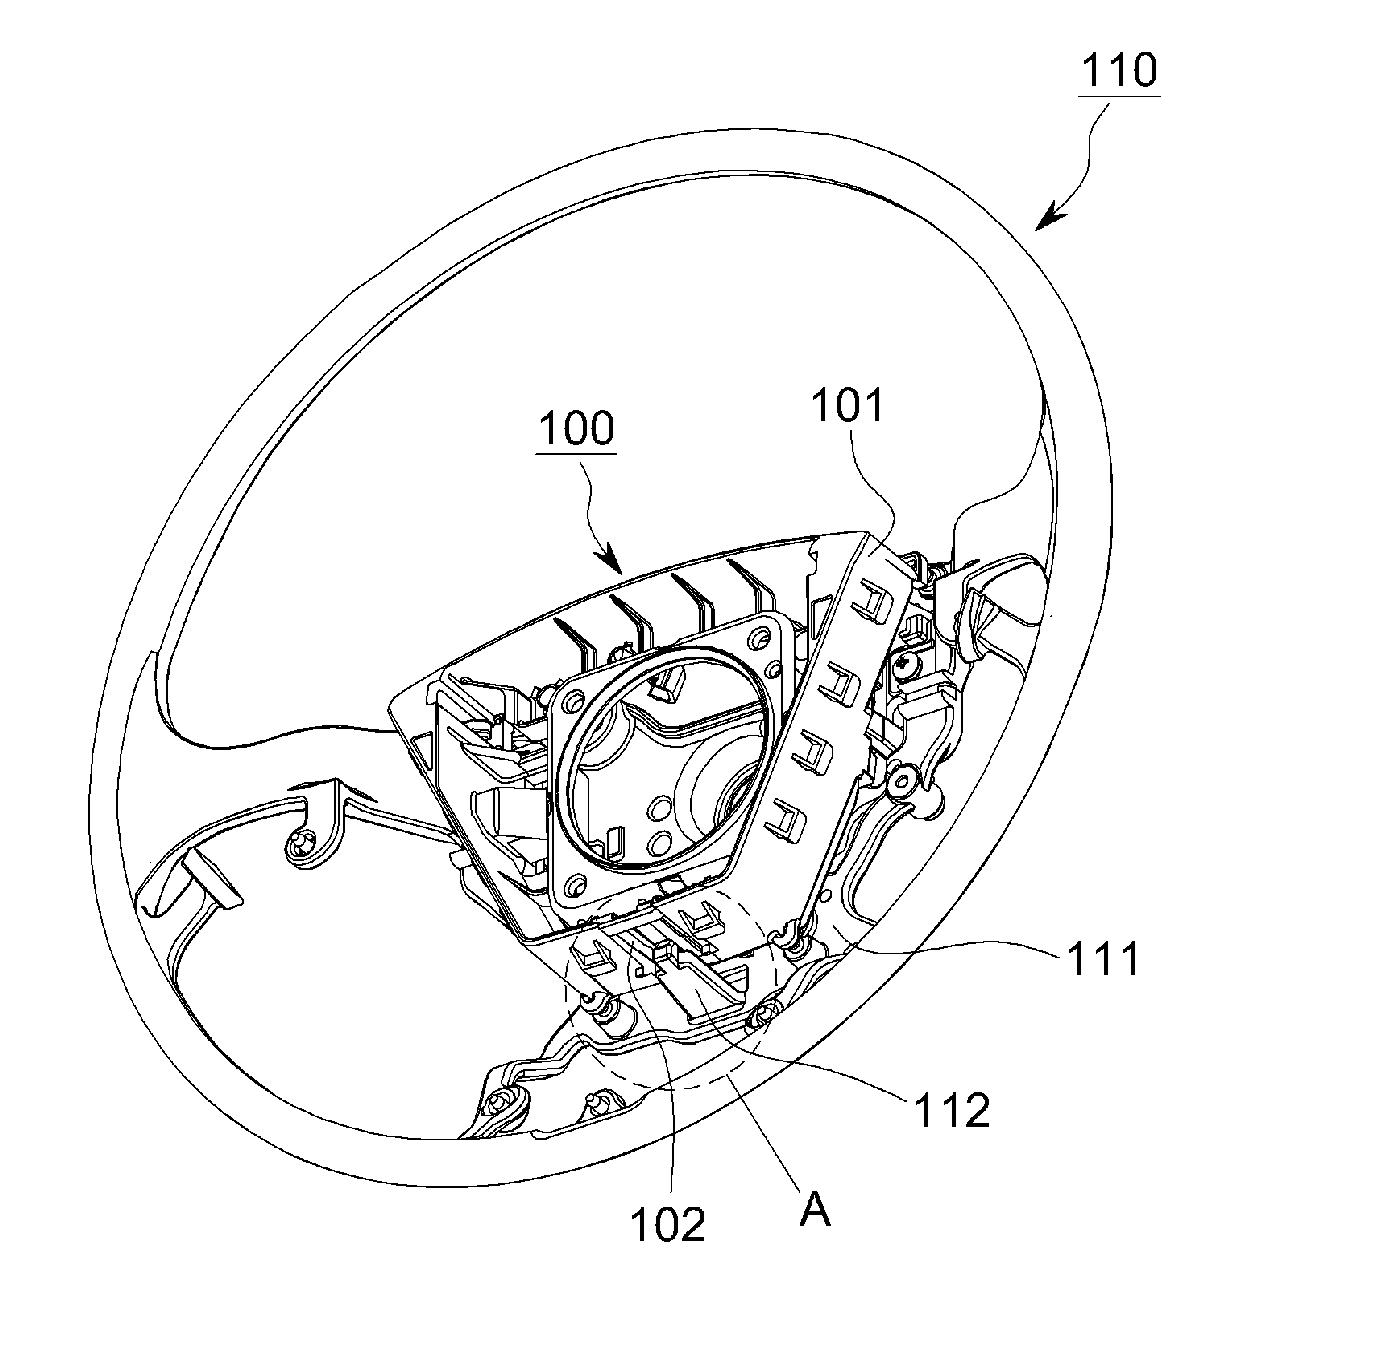 Assembly of airbag module and steering wheel